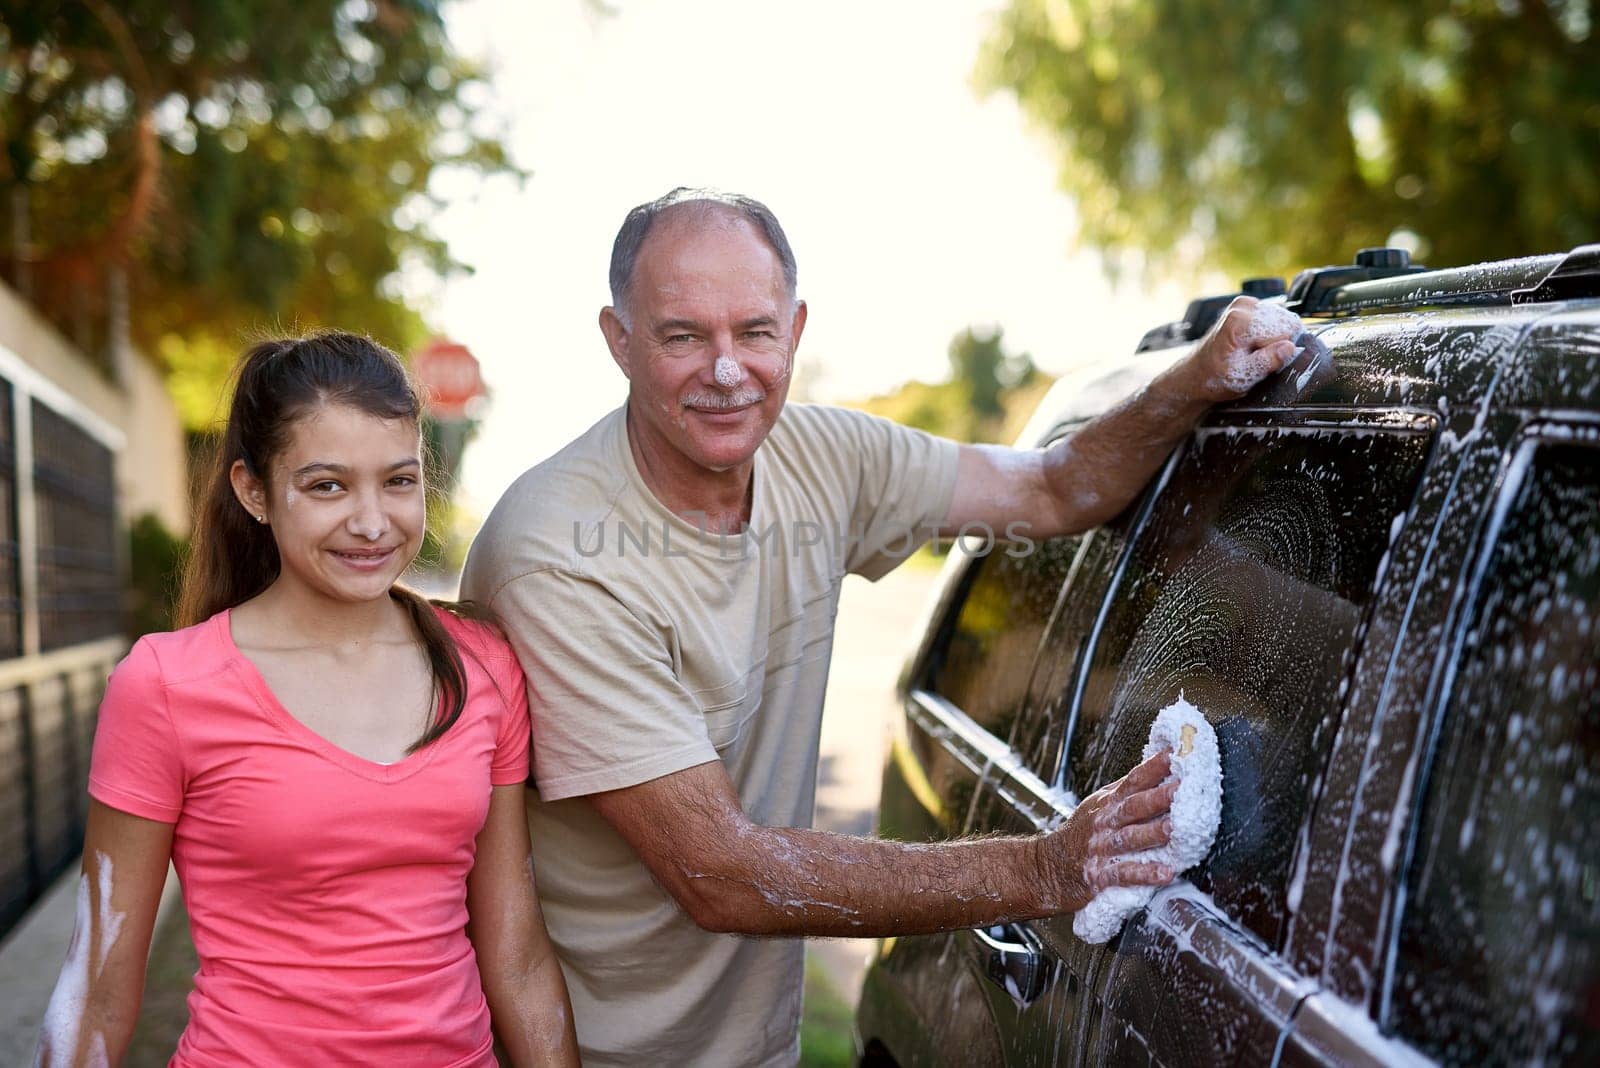 Family, washing car and portrait of man with daughter outdoor for cleaning in summer. Kids, love or smile with father and girl child in driveway to polish vehicle for responsibility or transportation.